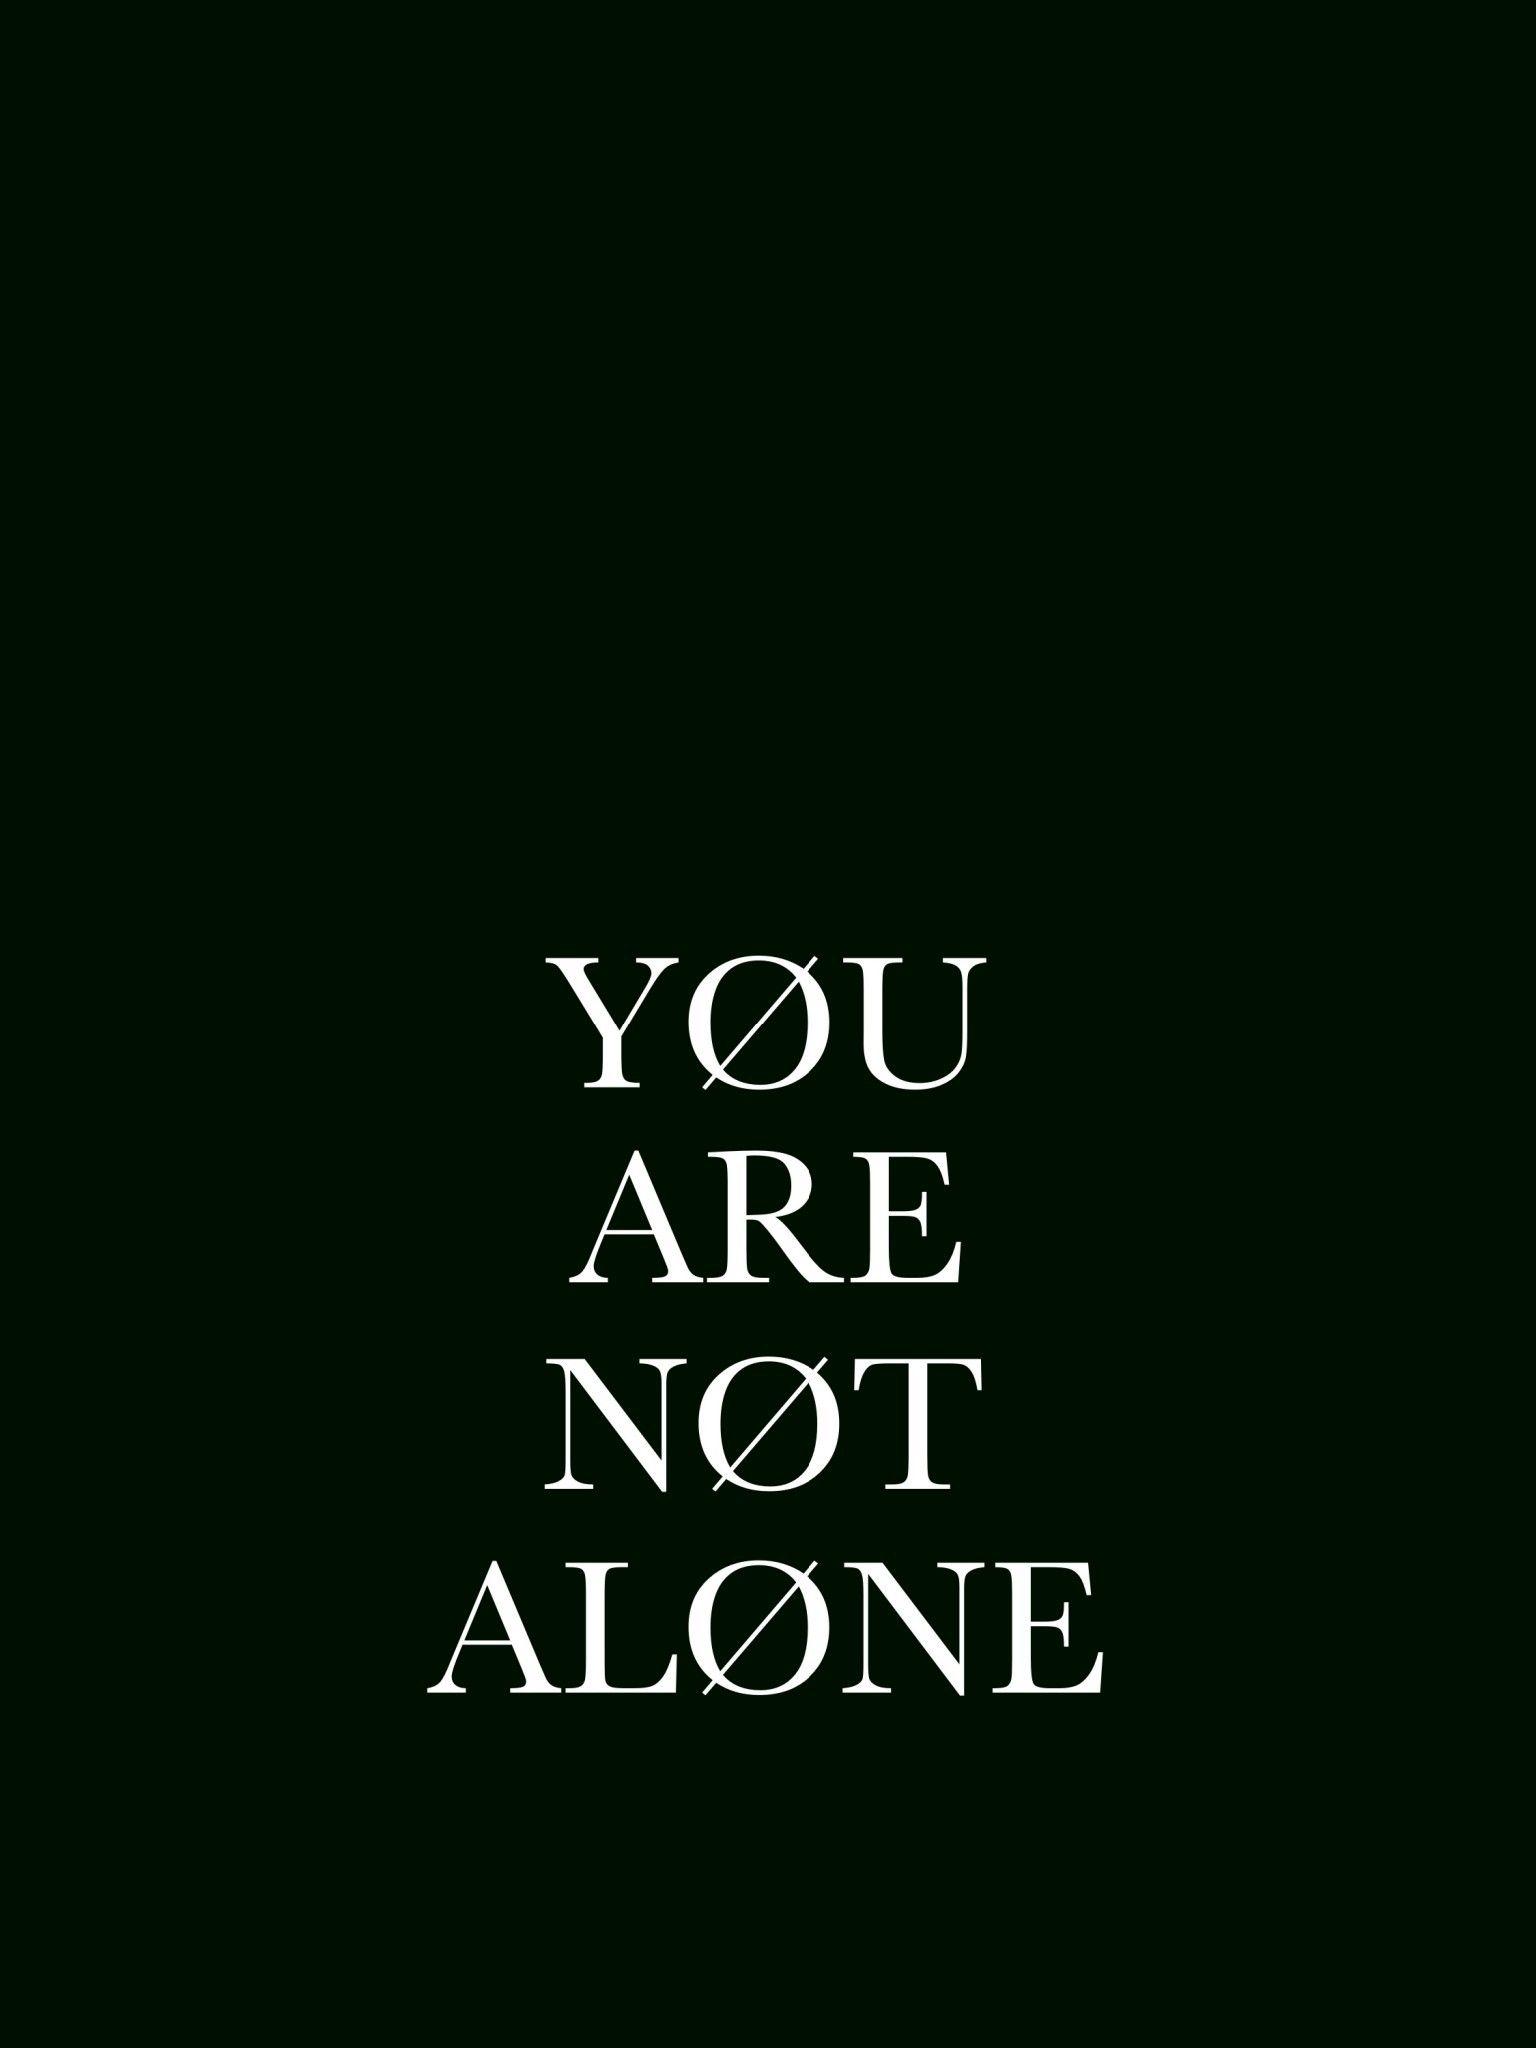 Download 1536x2048 You Are Not Alone, Inscription, Inspiration